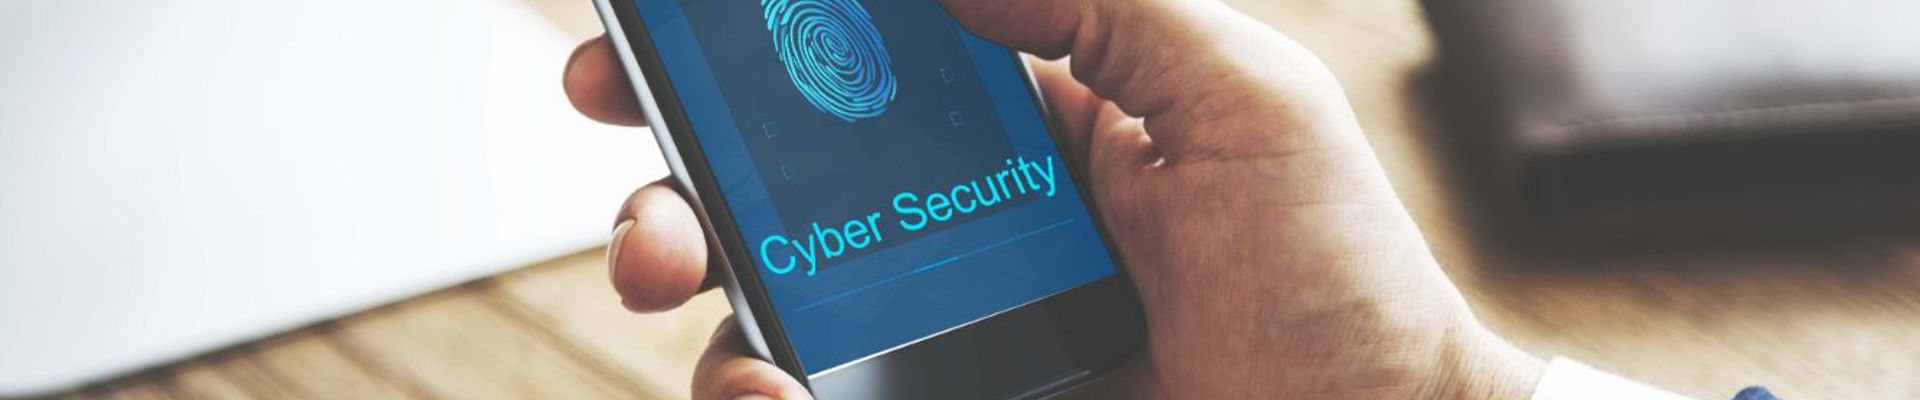 Preparing for cyber security in 2019 and beyond 